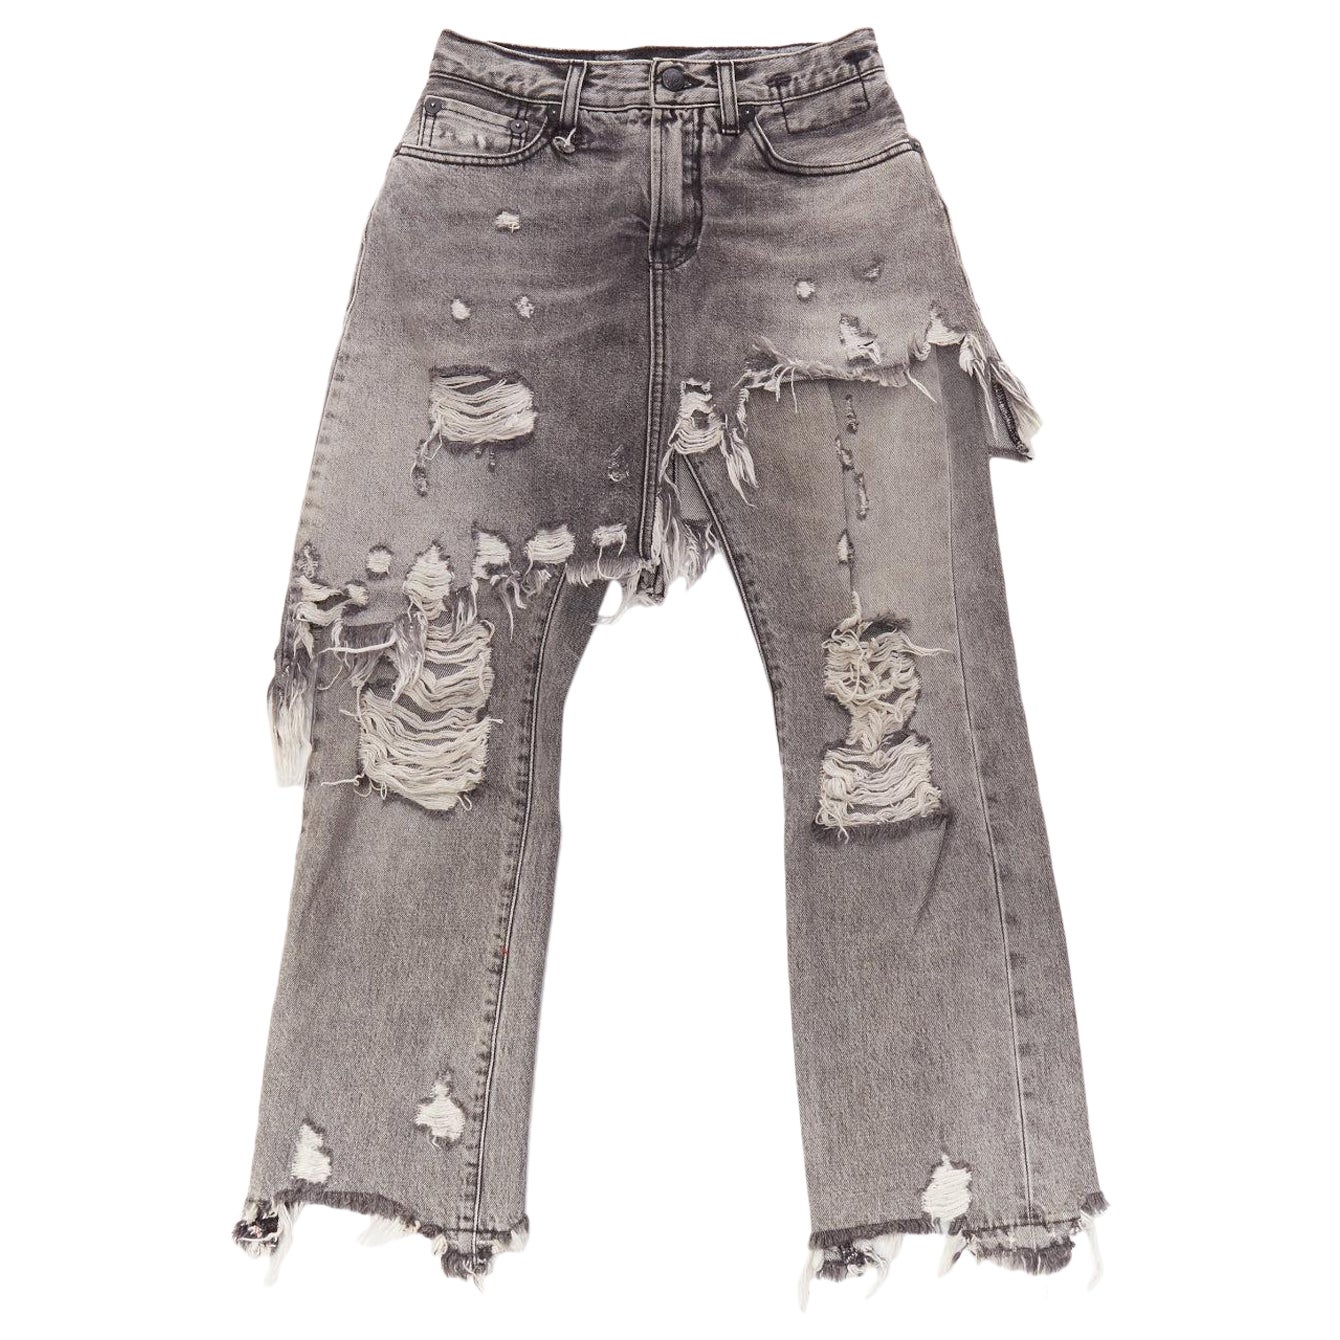 R13 grey distressed stone washed layered asymmetric skirt cropped jeans XS For Sale